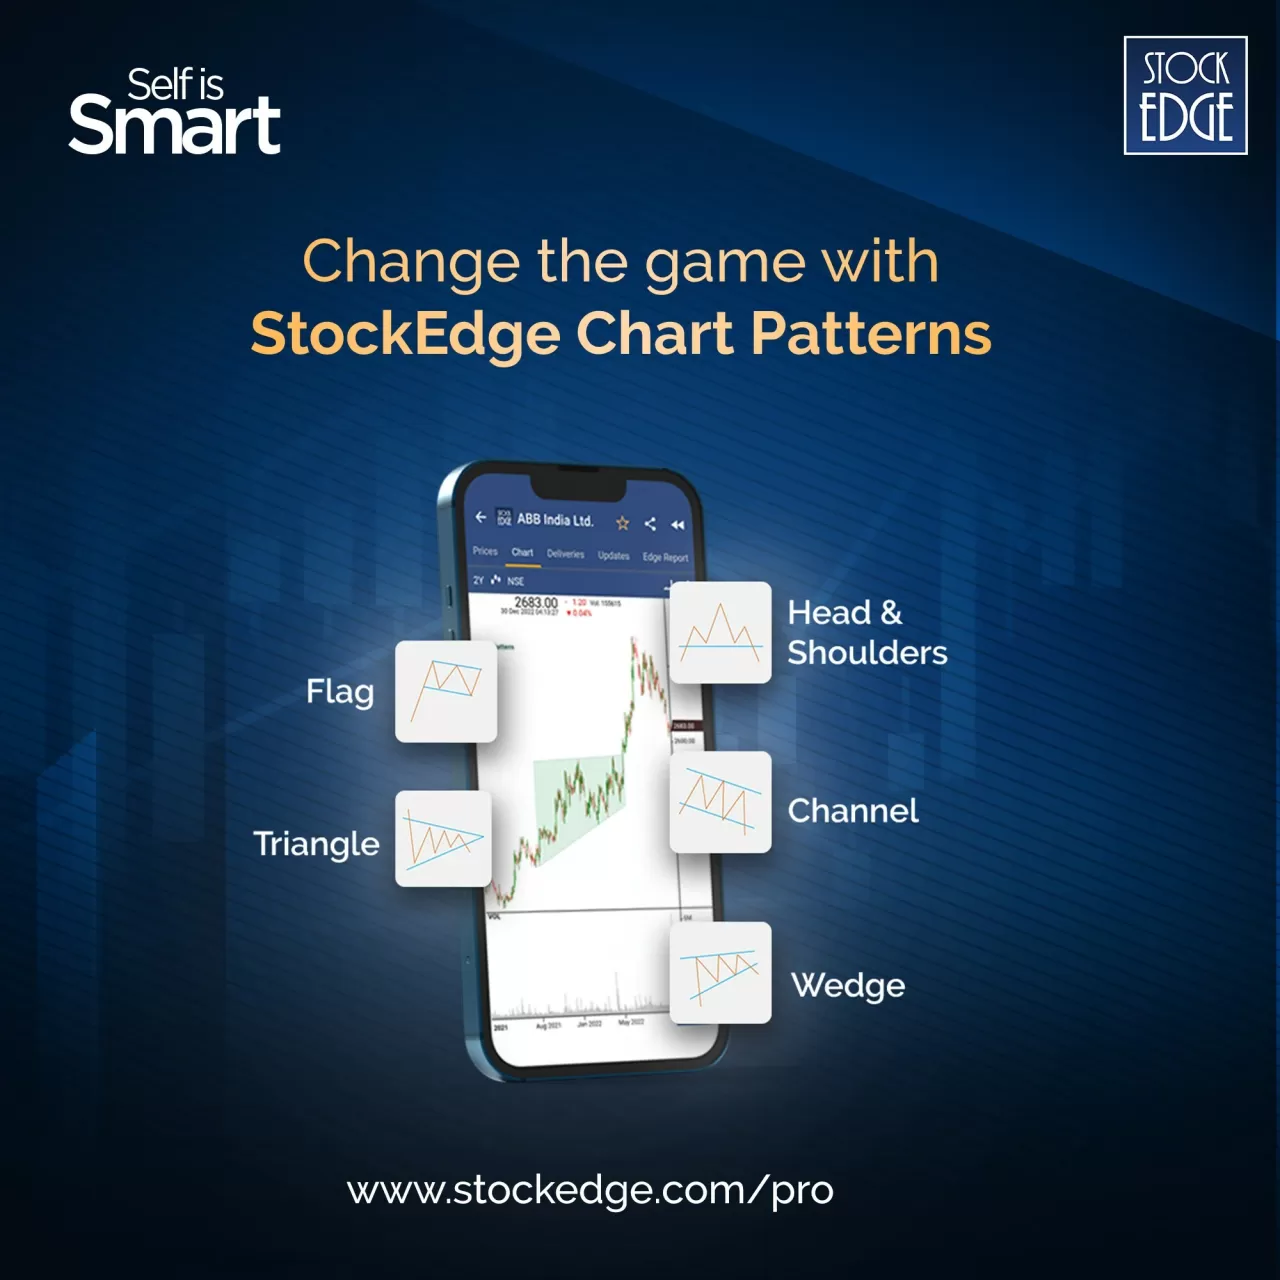 StockEdge launches India's first AI-powered screening mechanism to automatically identify Chart Patterns in different stocks with StockEdge Pro img#1